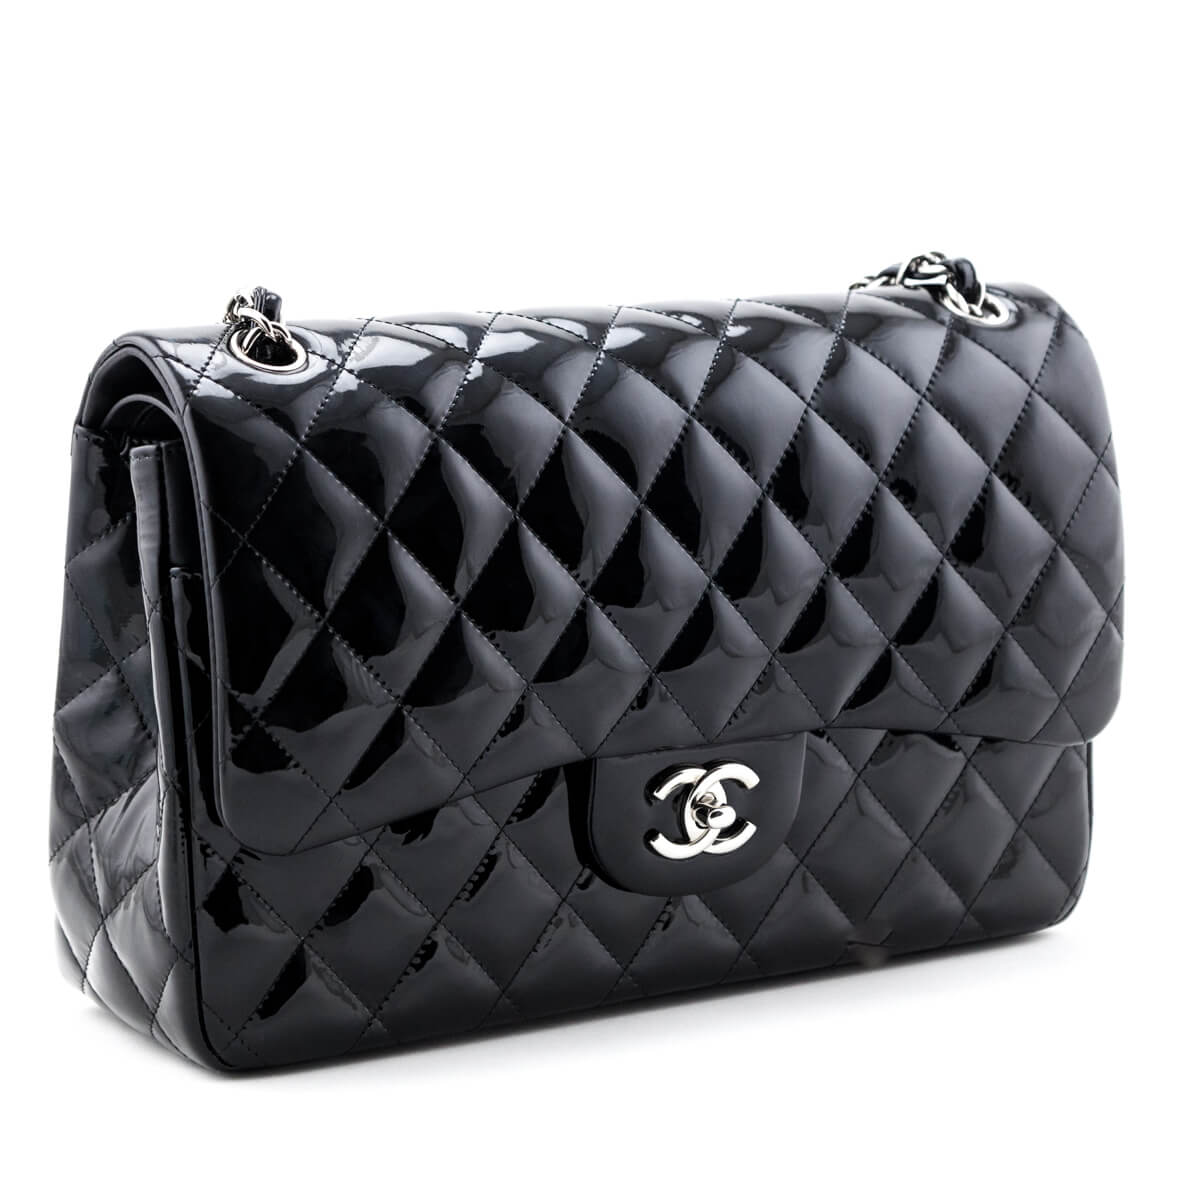 CHANEL, Bags, Chanel Quilted Jumbo Patent Leather Backpack